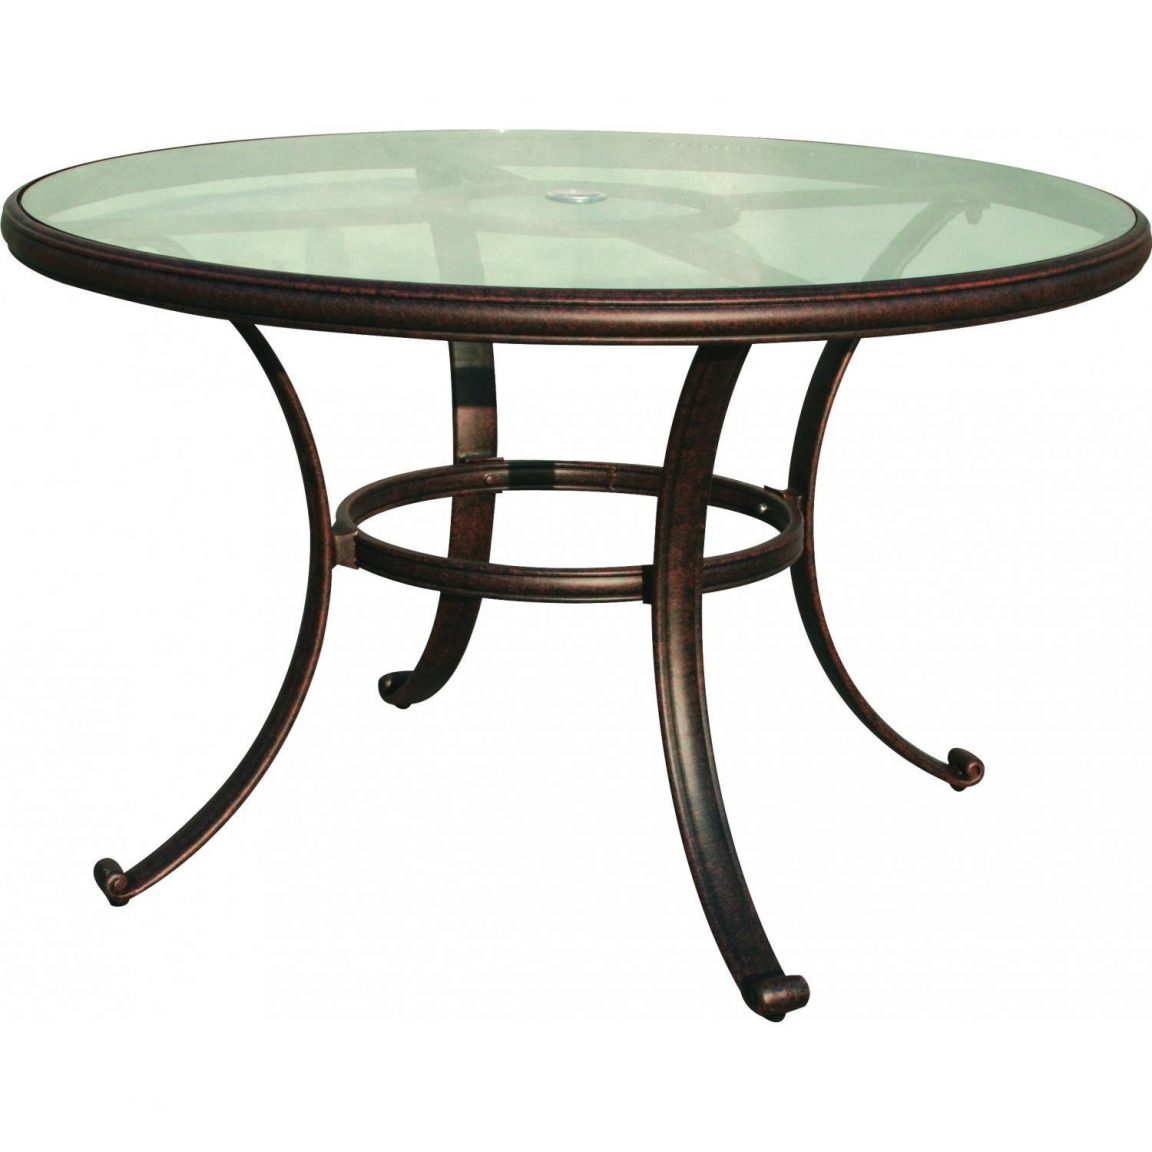 outdoor dining table replacement glass photo - 4